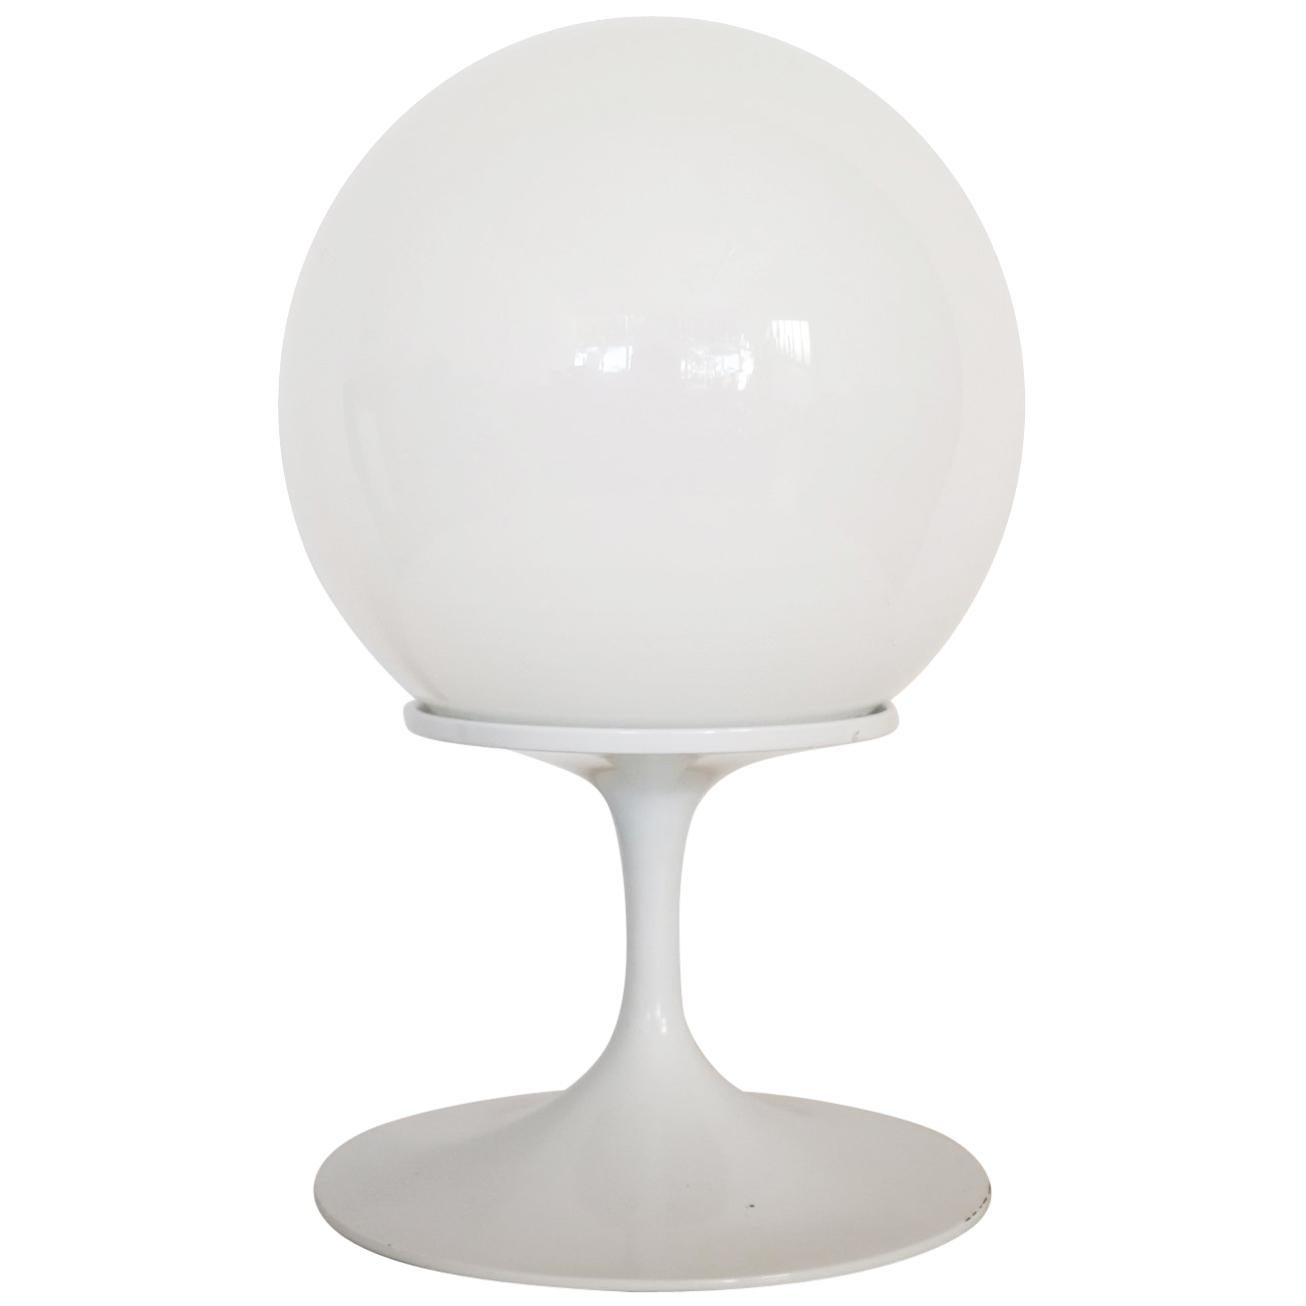 Bill Curry for Design Line Stemlite Pedestal Table Lamp, 1960s For Sale